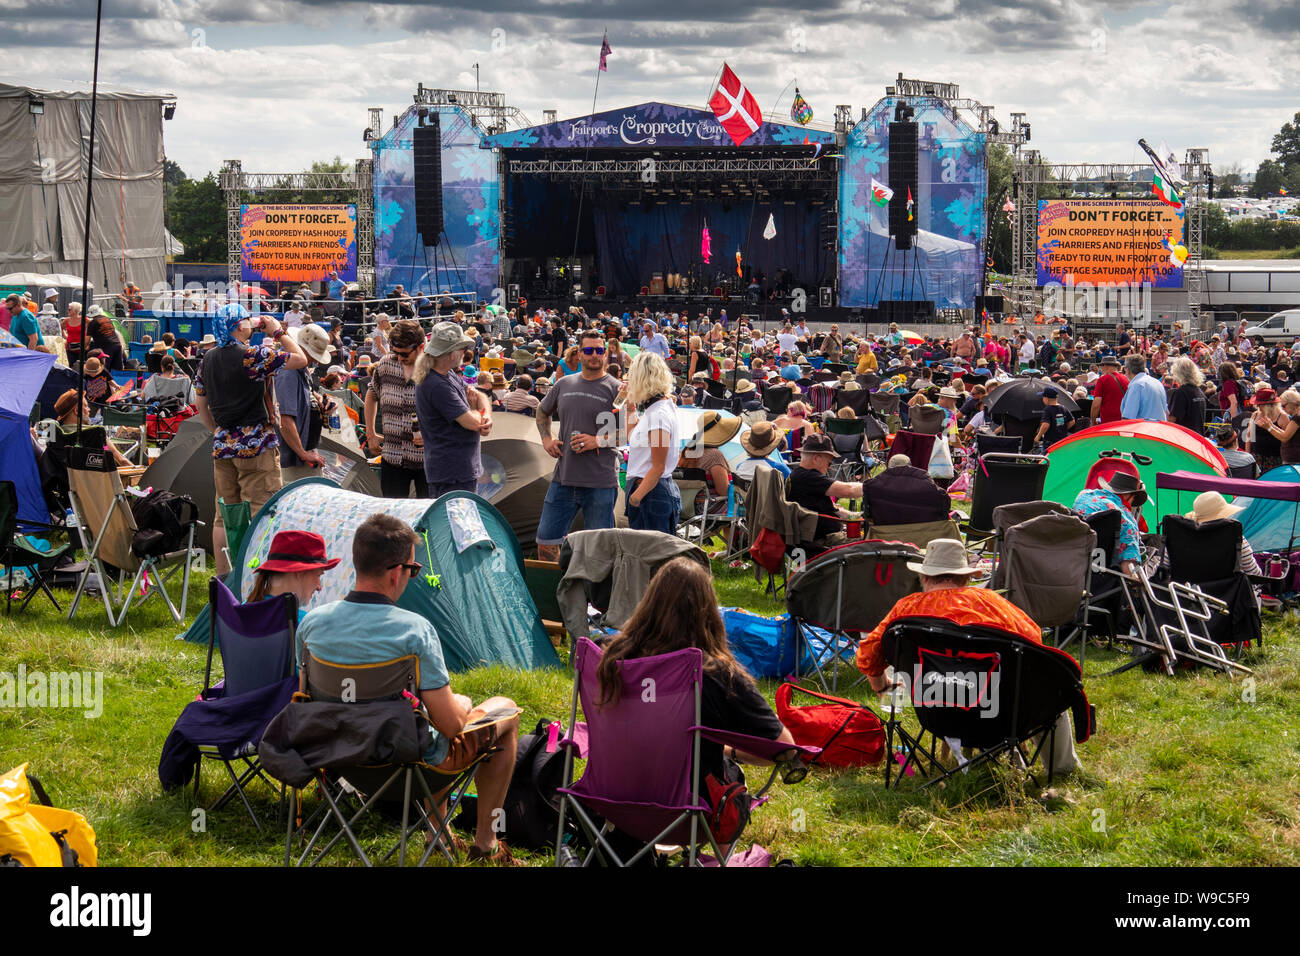 UK, England, Oxfordshire, Cropredy, Fairport’s Cropredy Convention annual music festival crowd and stage Stock Photo